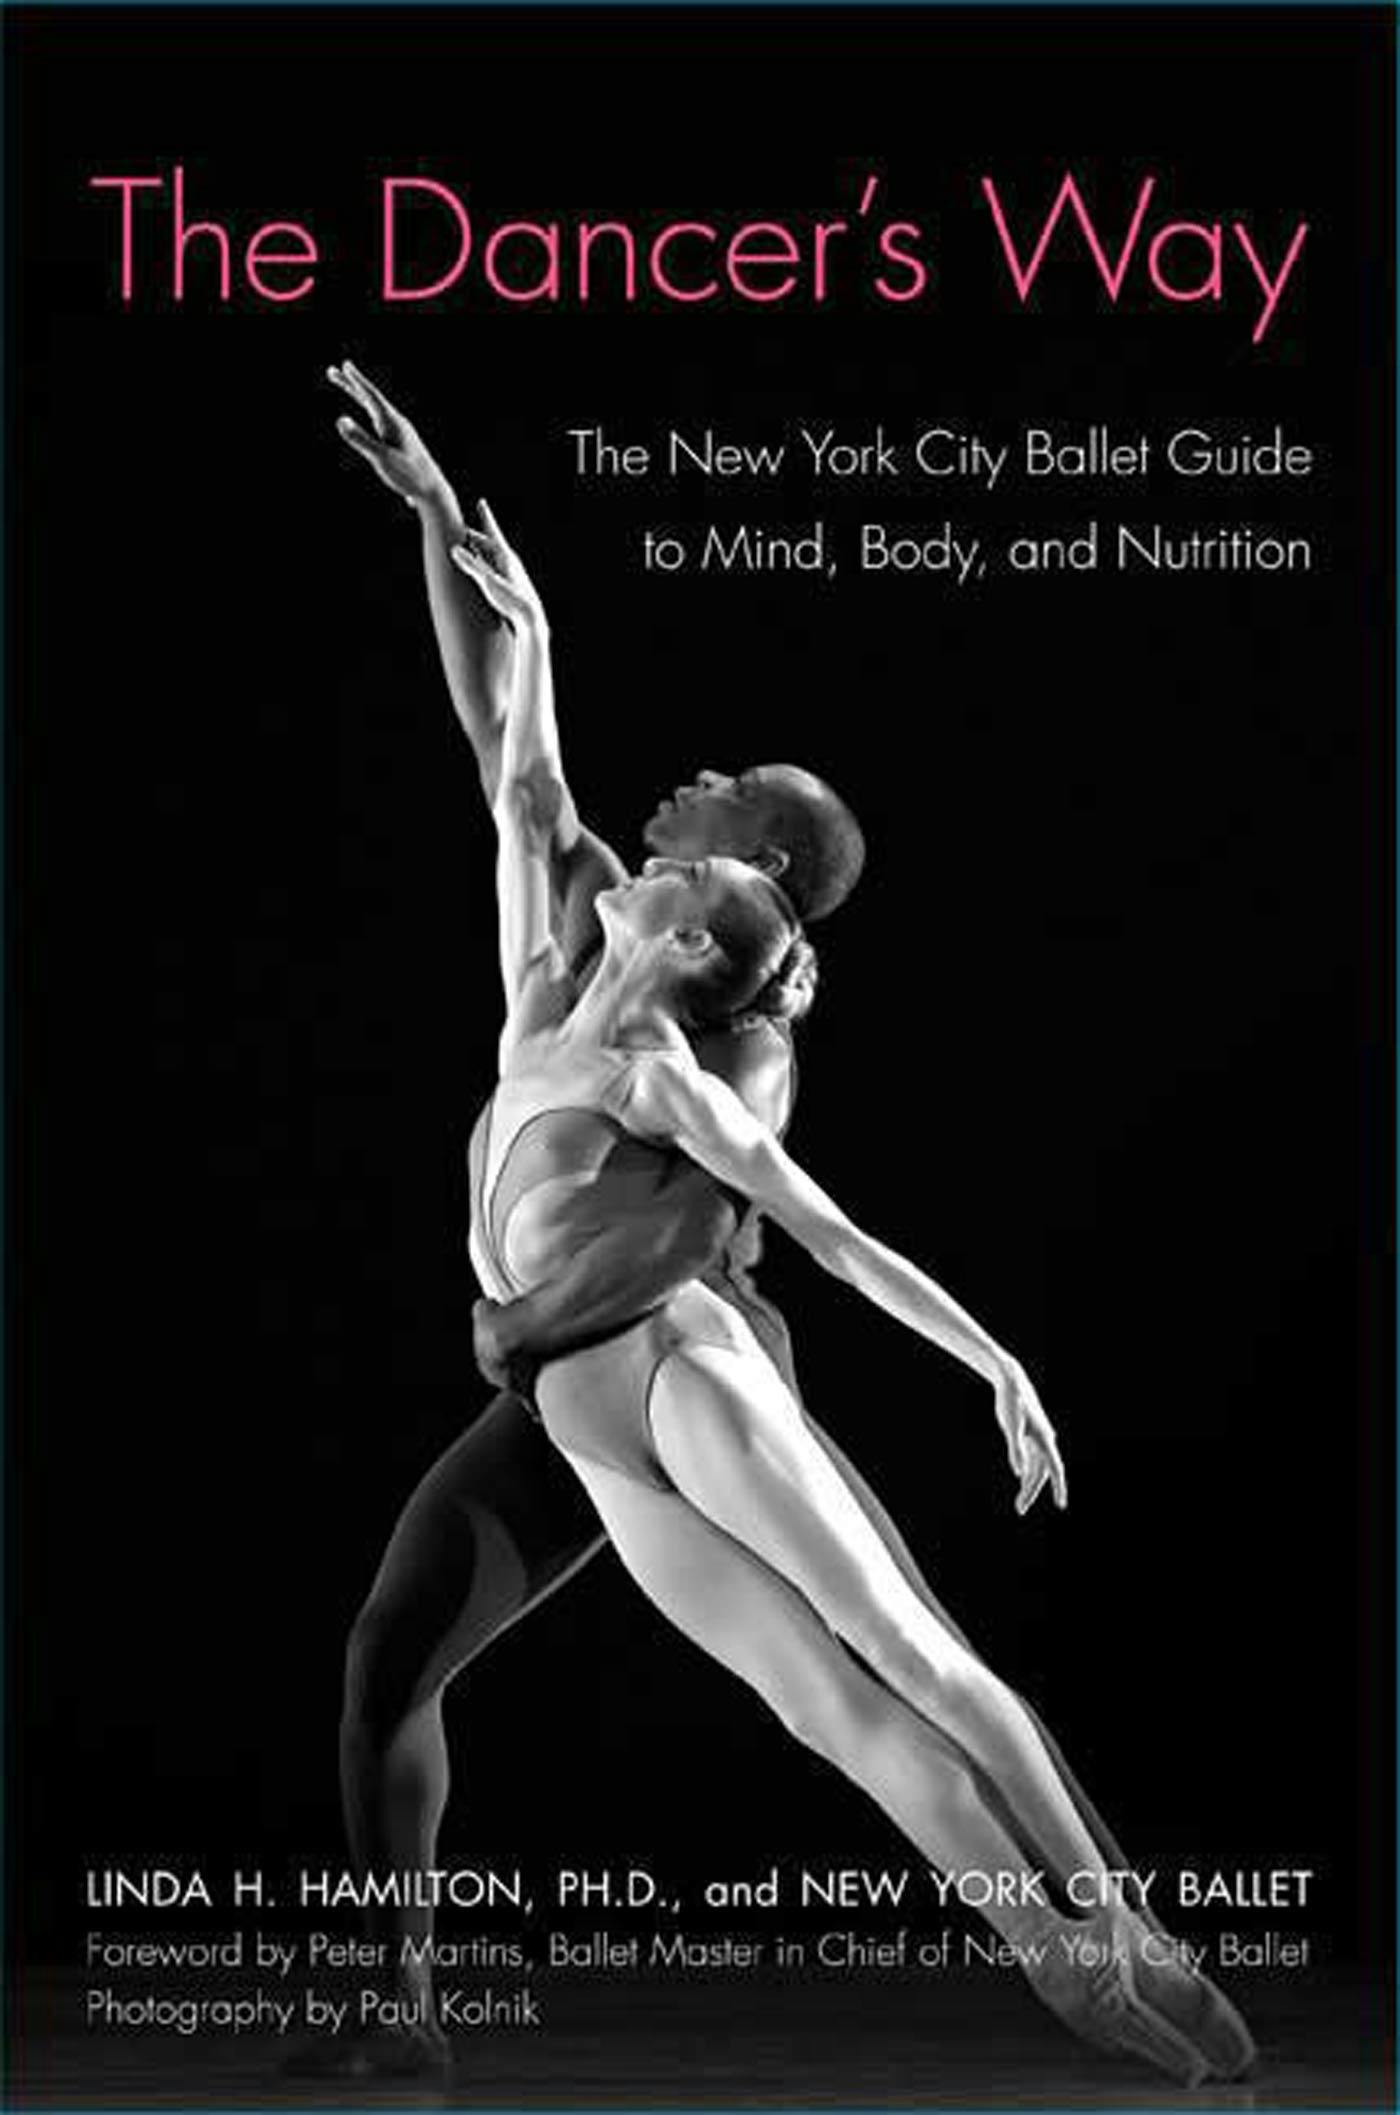 NYC Ballet Workout: Fifty Stretches And Exercises Anyone Can Do For A  Strong, Graceful, And Sculpted Body: Martins, Peter: 9780688152024:  : Books